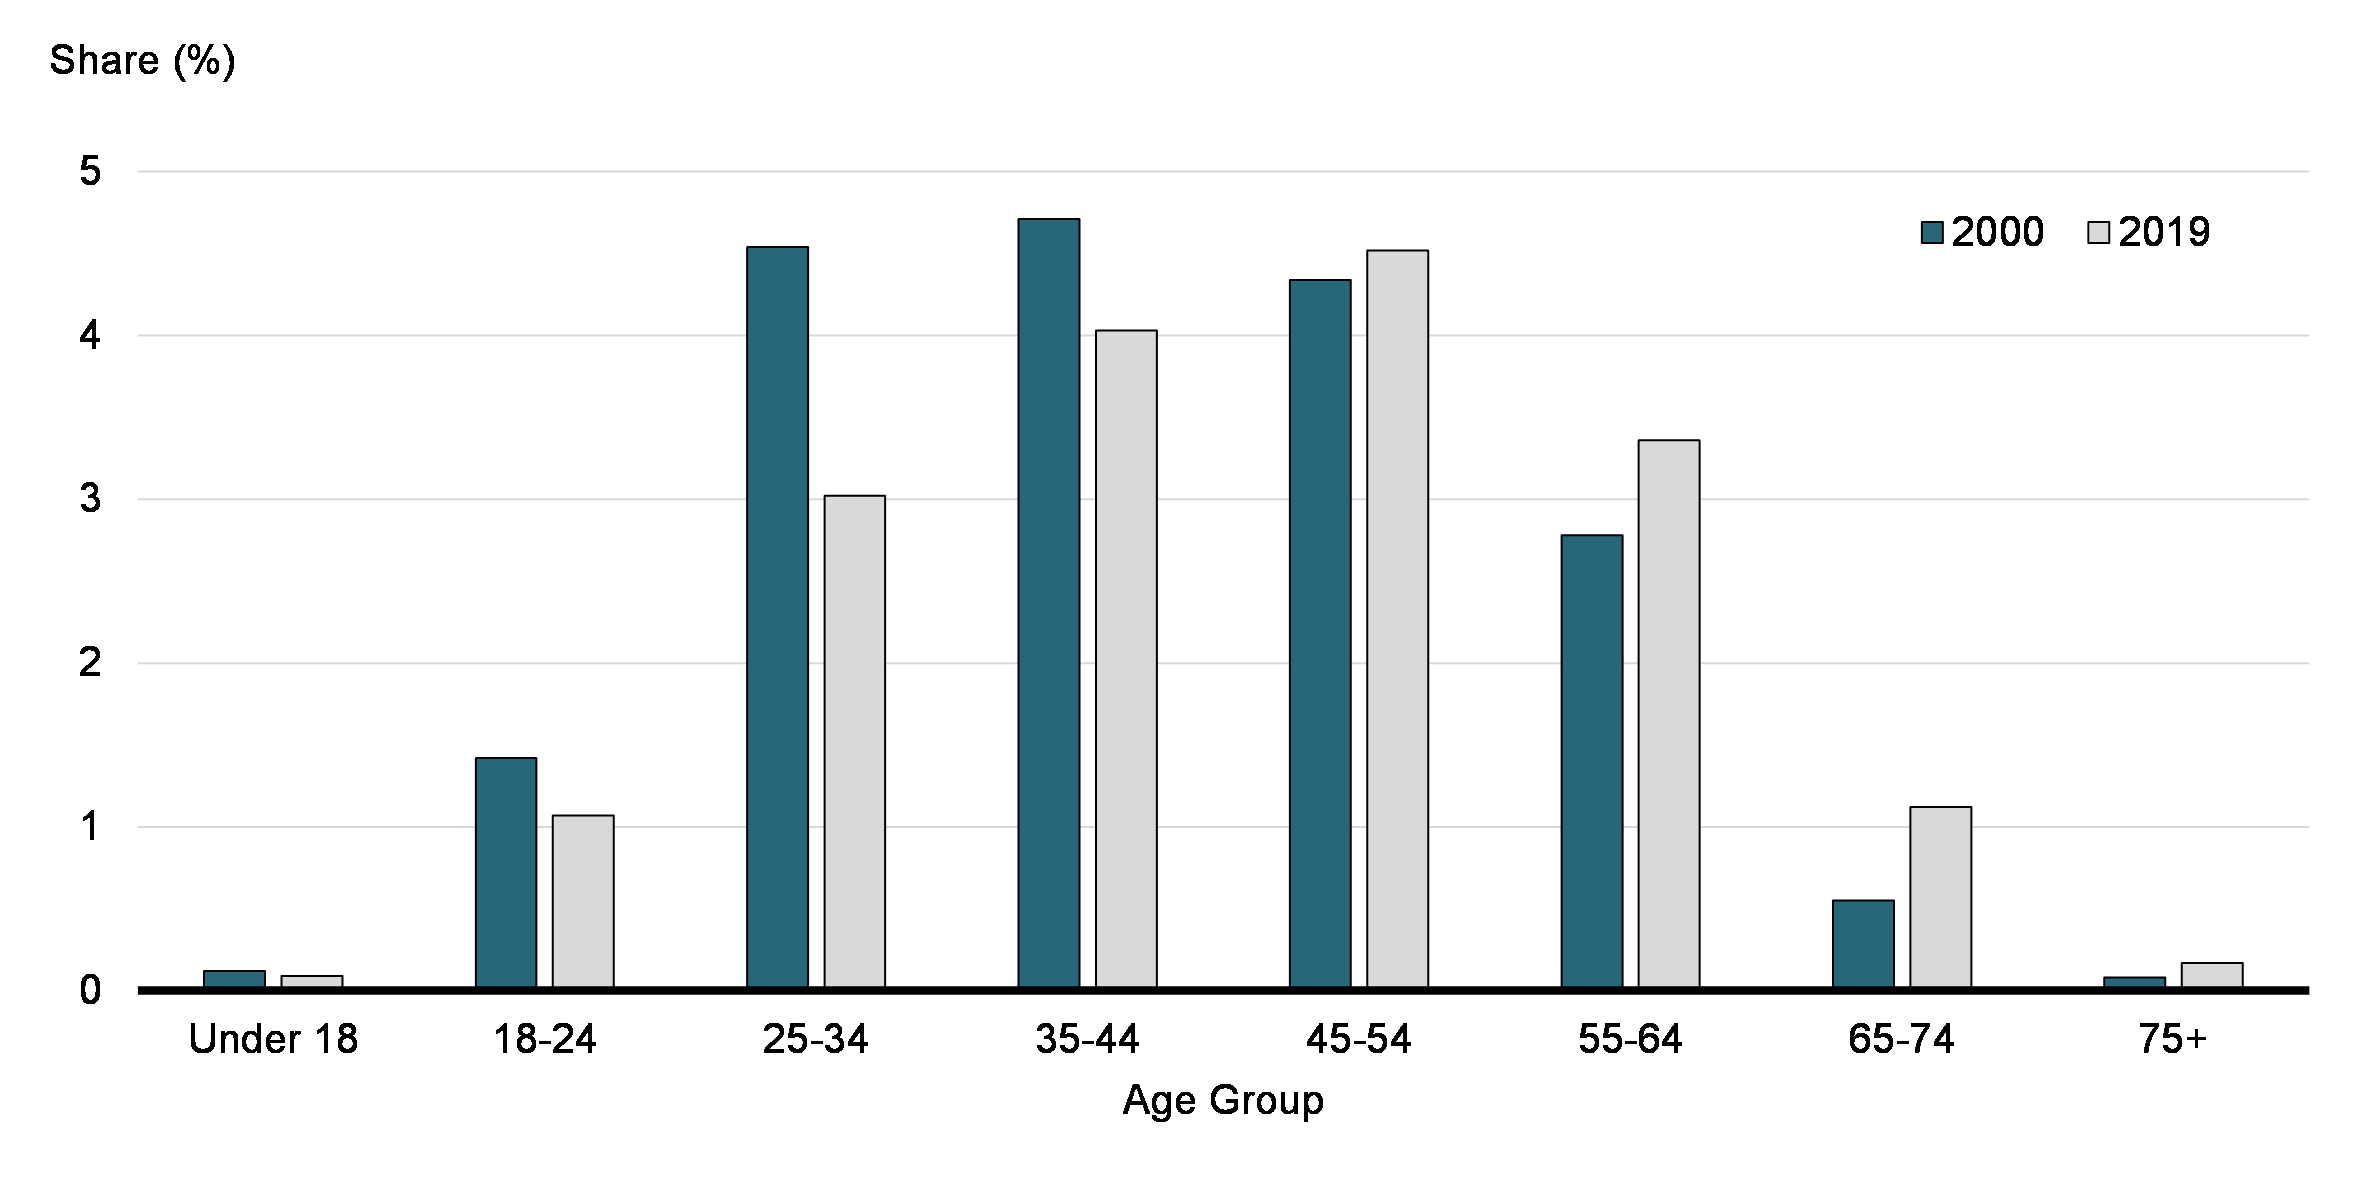  Chart 28: Share of OEE Claimants among Taxfilers, by Age Group (2000 and 2019)

